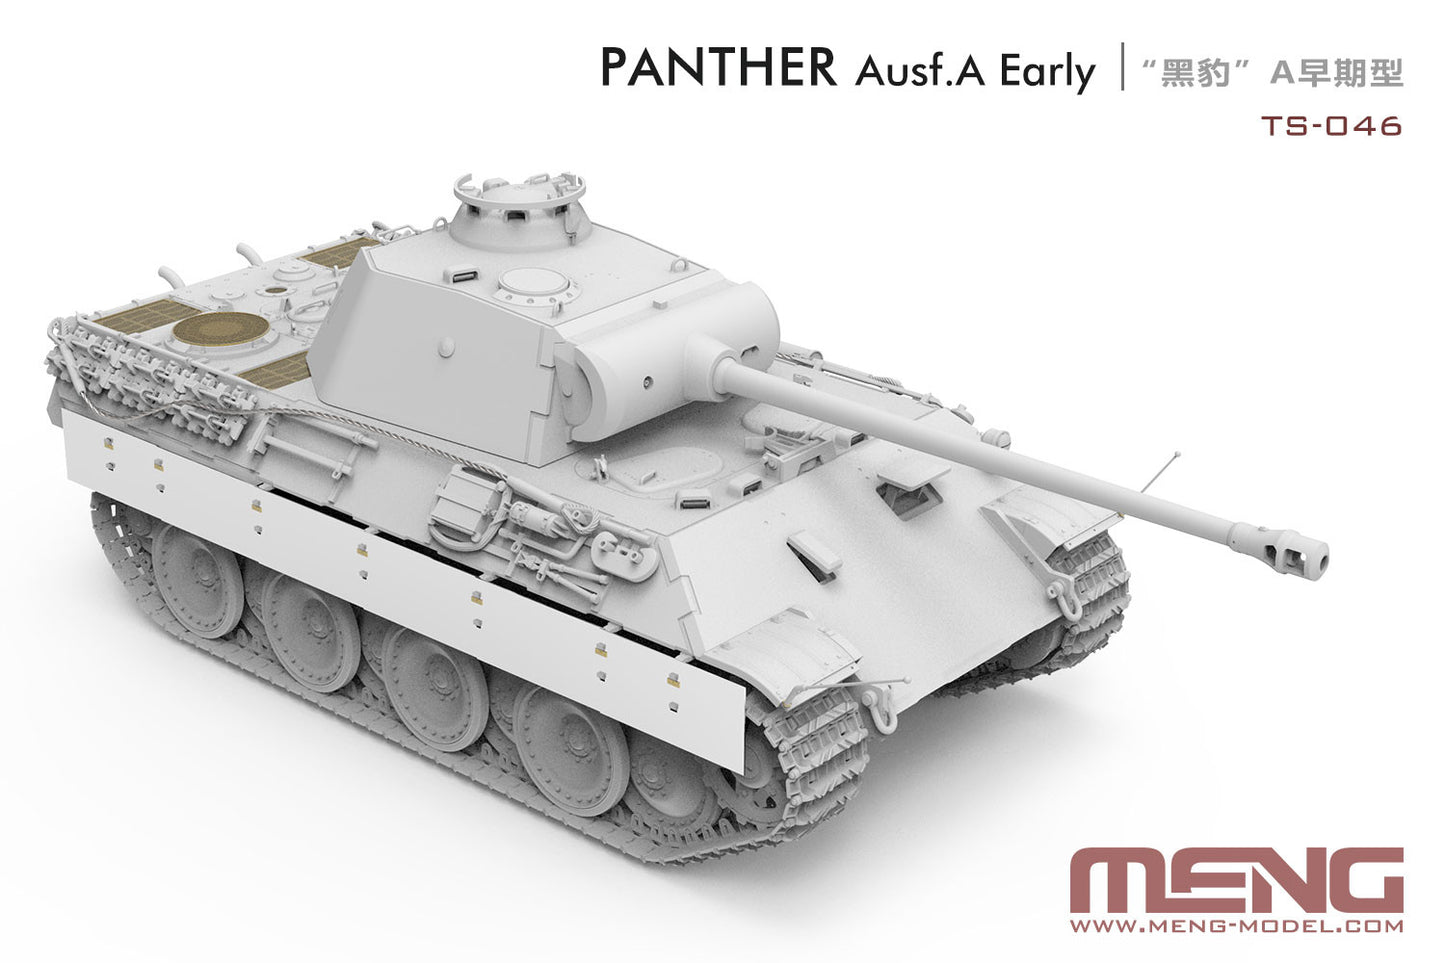 Meng Model 1/35 TS-046 Panther Ausf.A Early